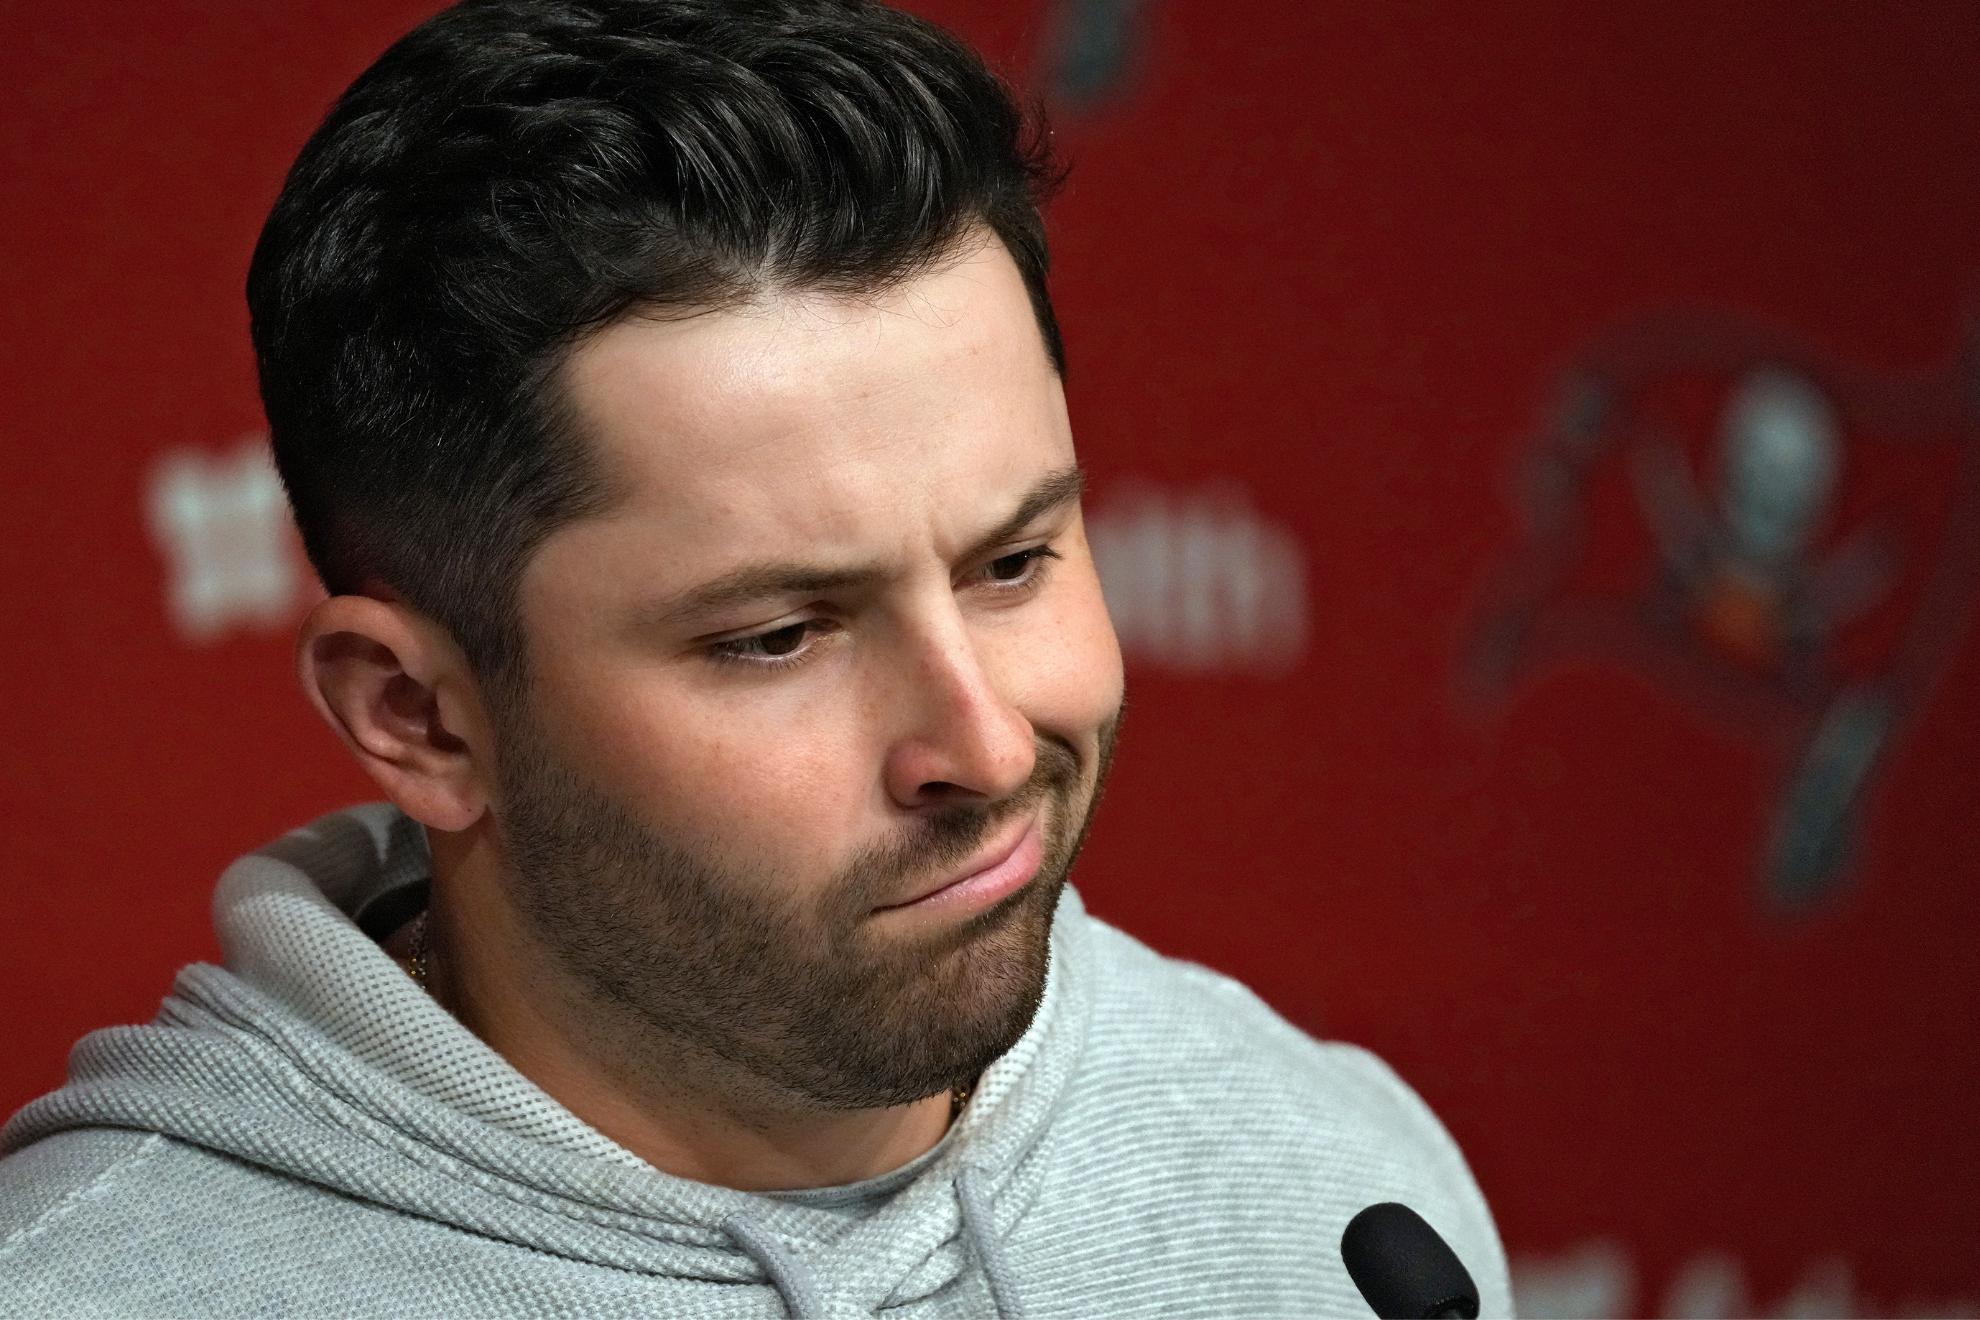 Former No. 1 overall pick Baker Mayfield is a possible successor to Tom Brady in Tampa.